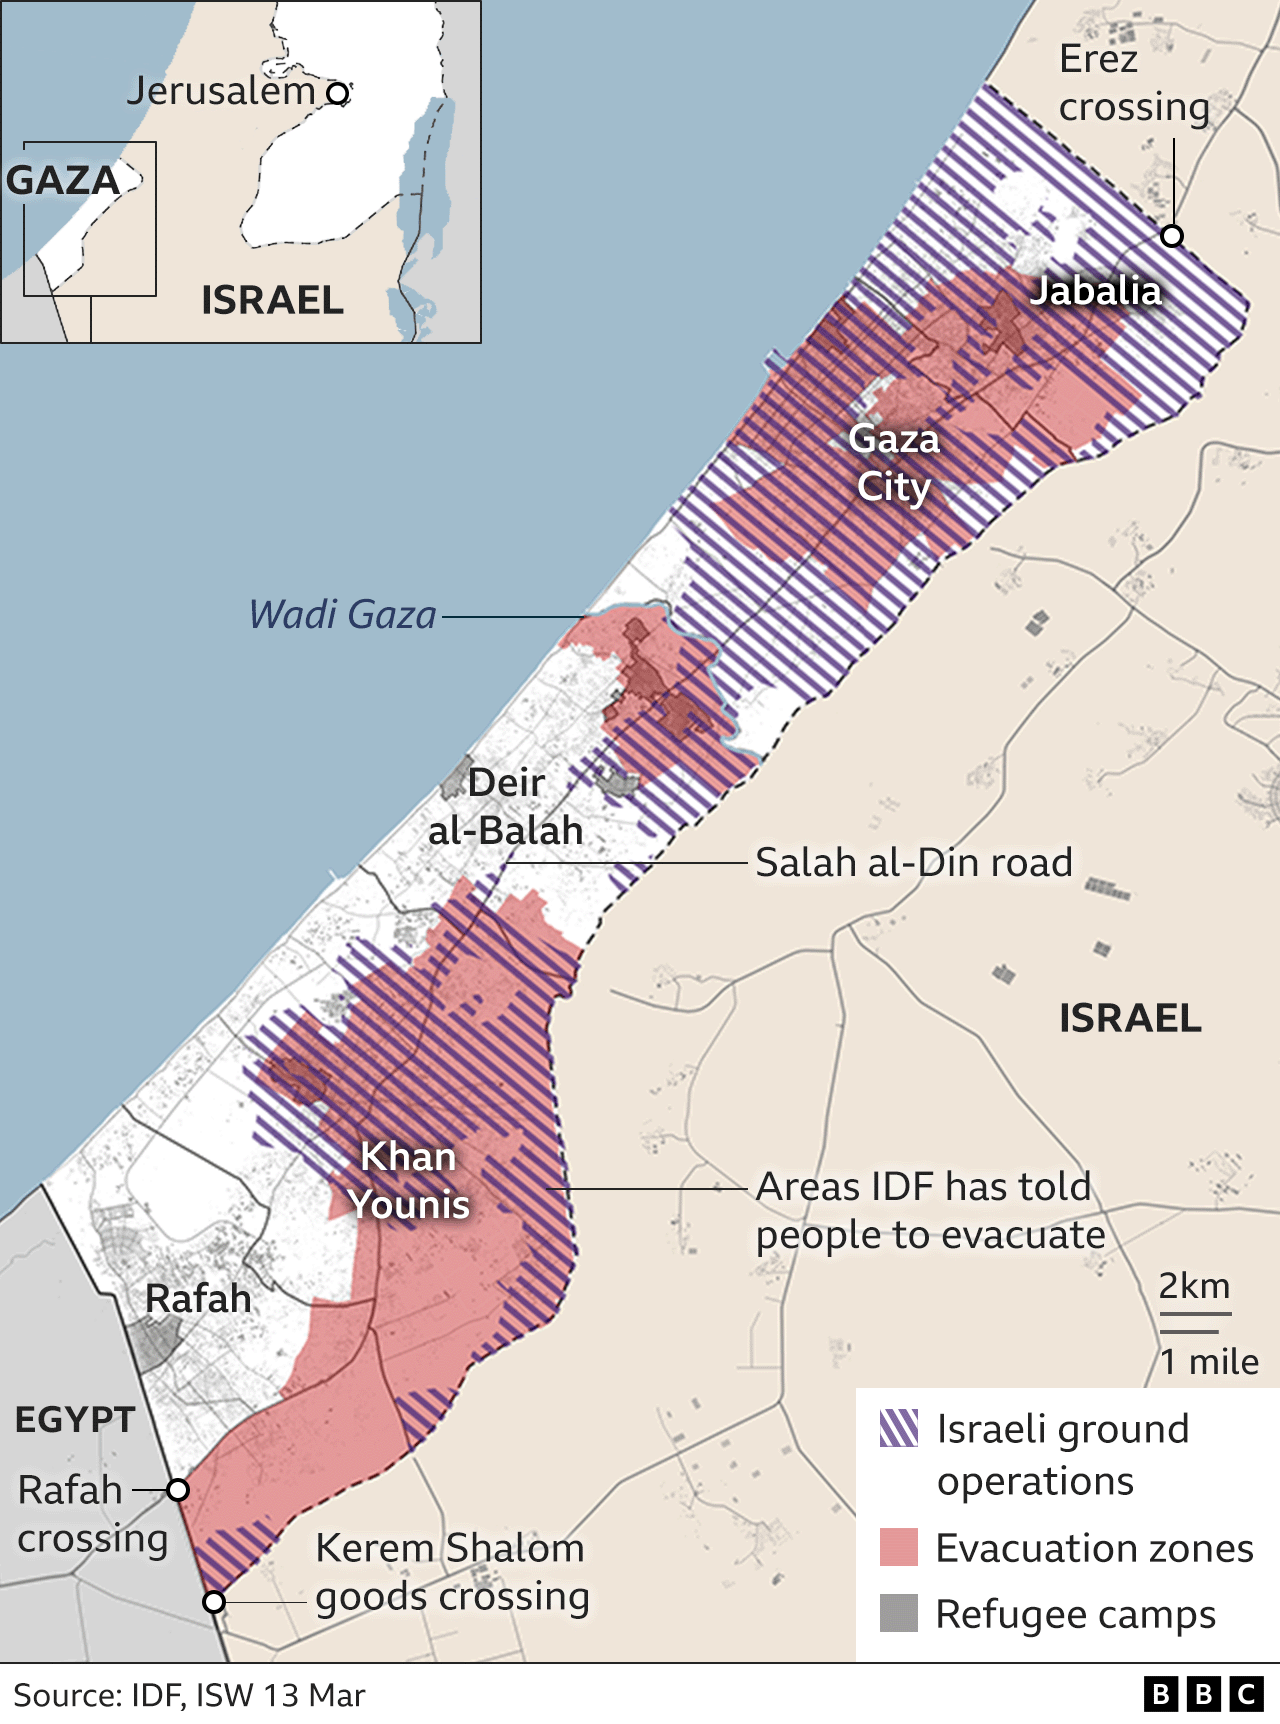 Map of the Gaza Strip showing Israeli ground operations and evacuation zones